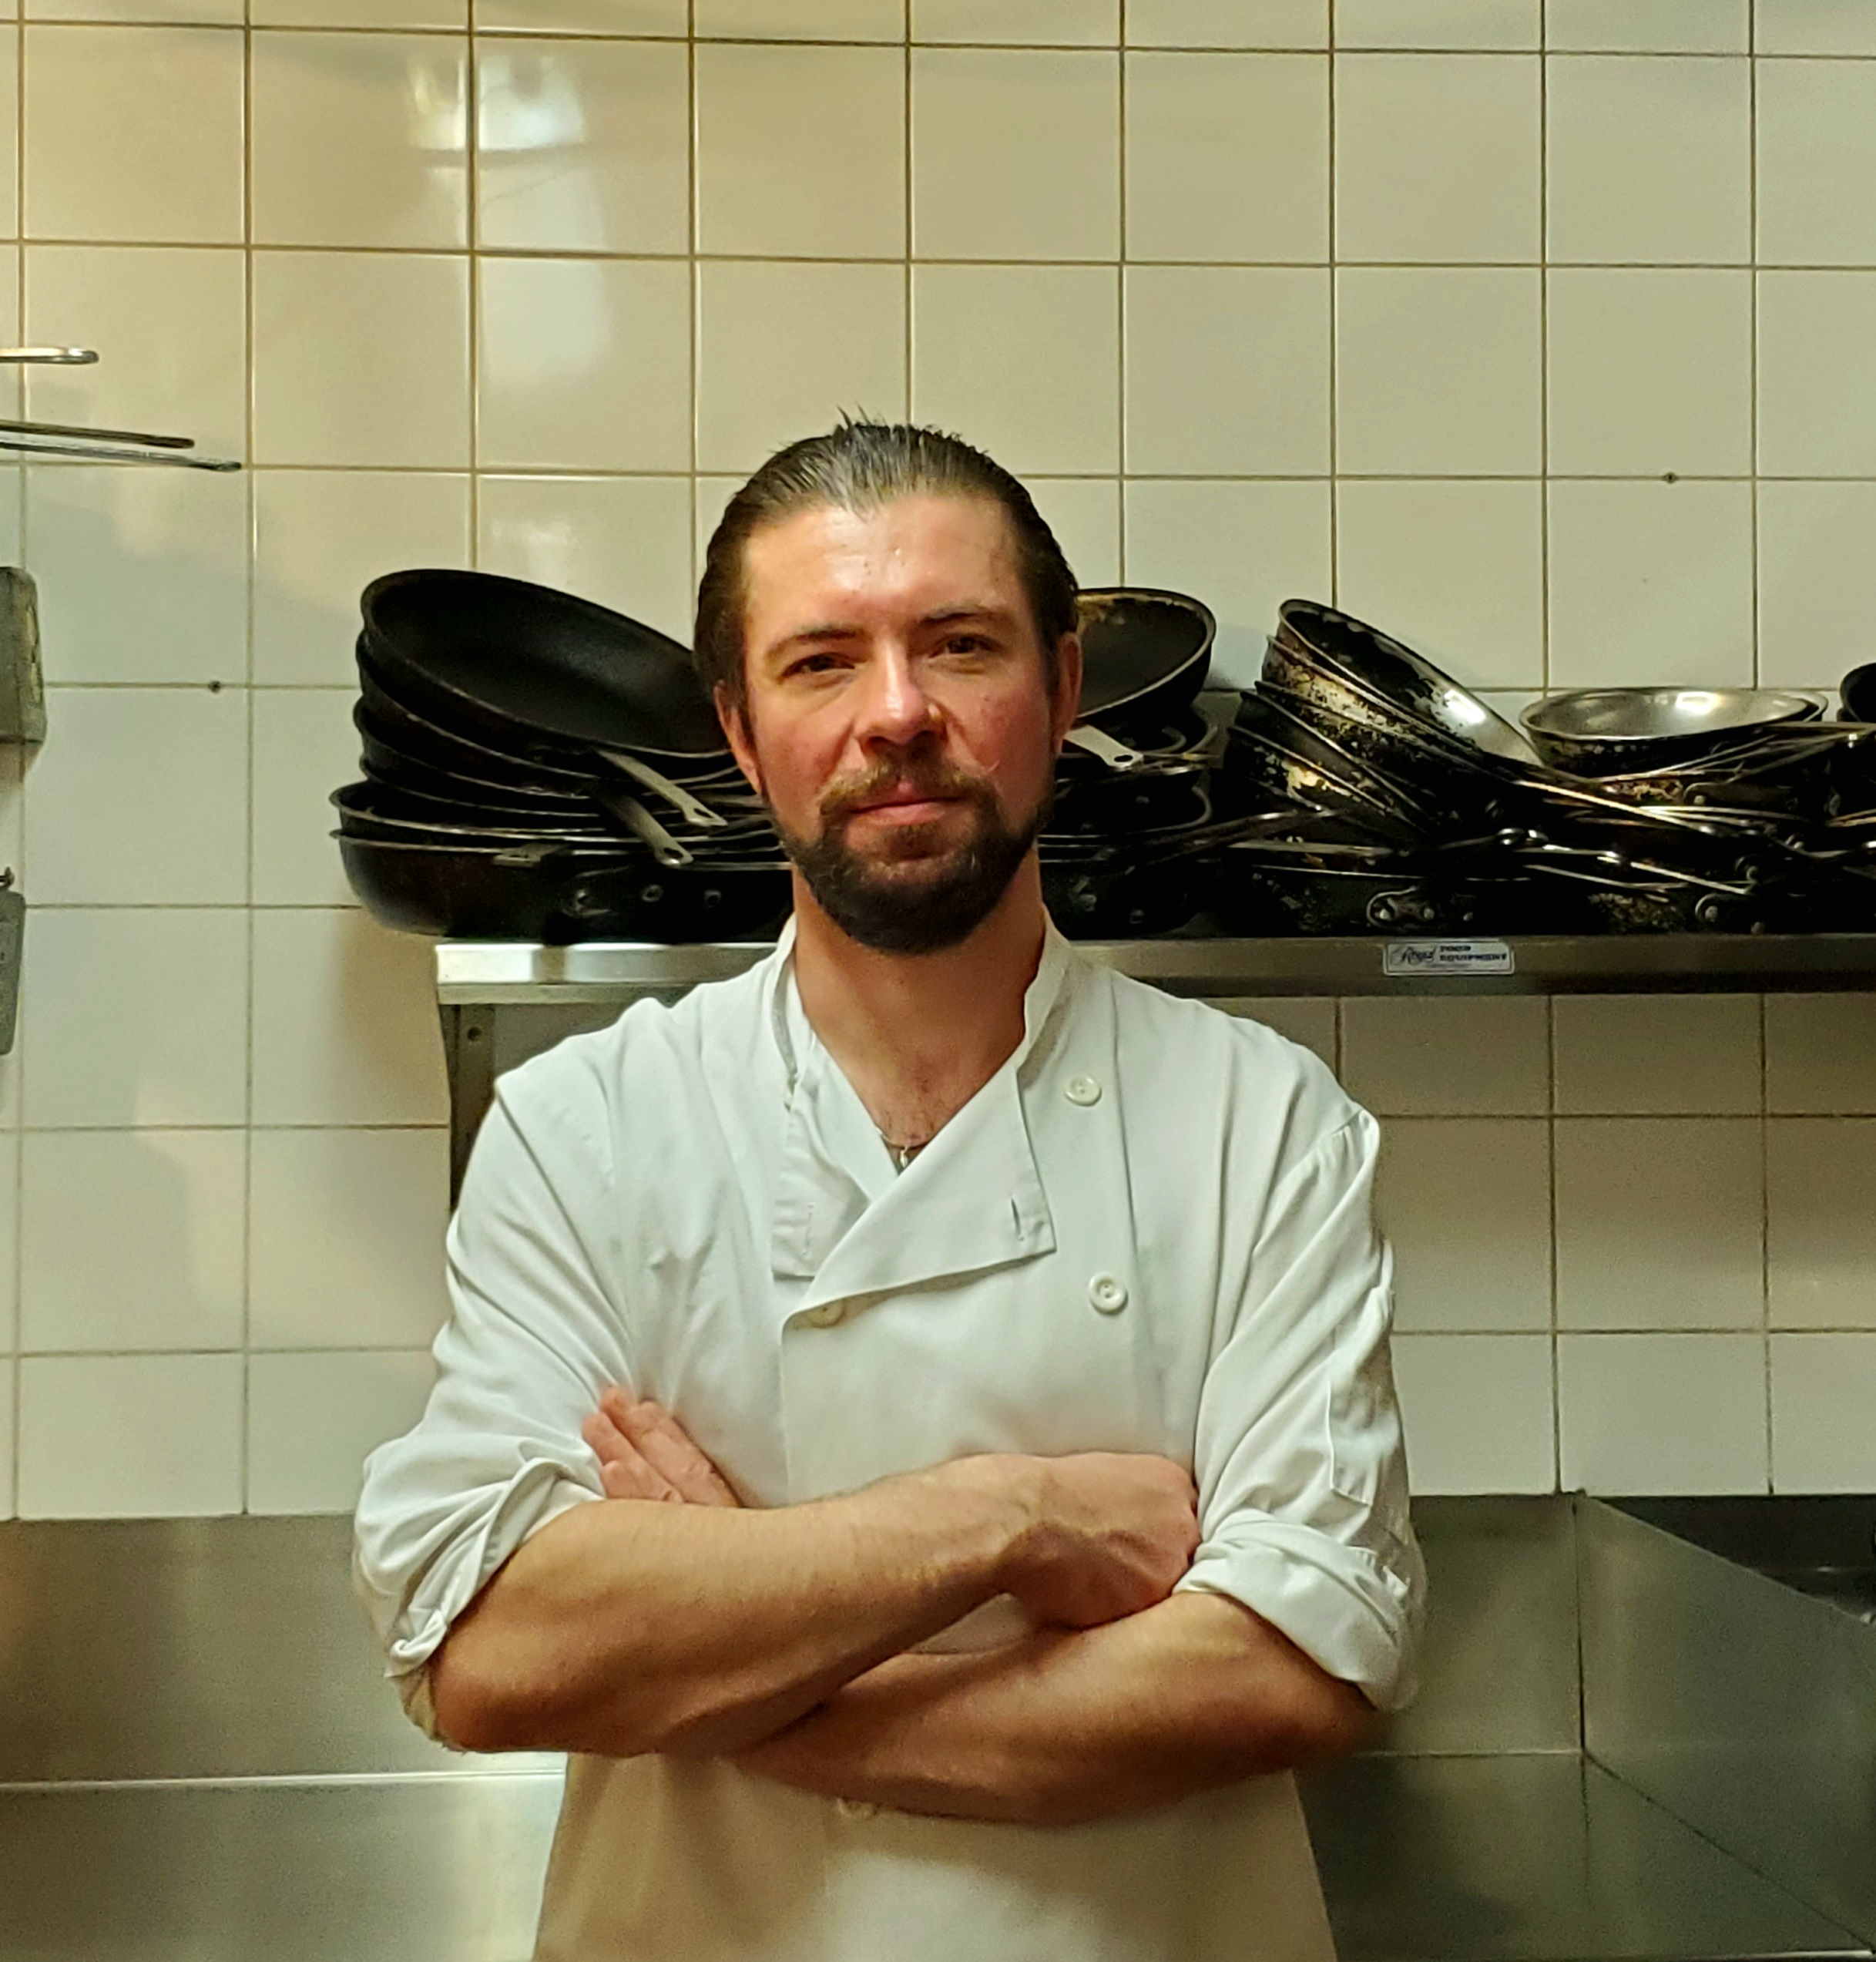 A man with facial hair stands in a professional kitchen wearing a white chef's uniform.